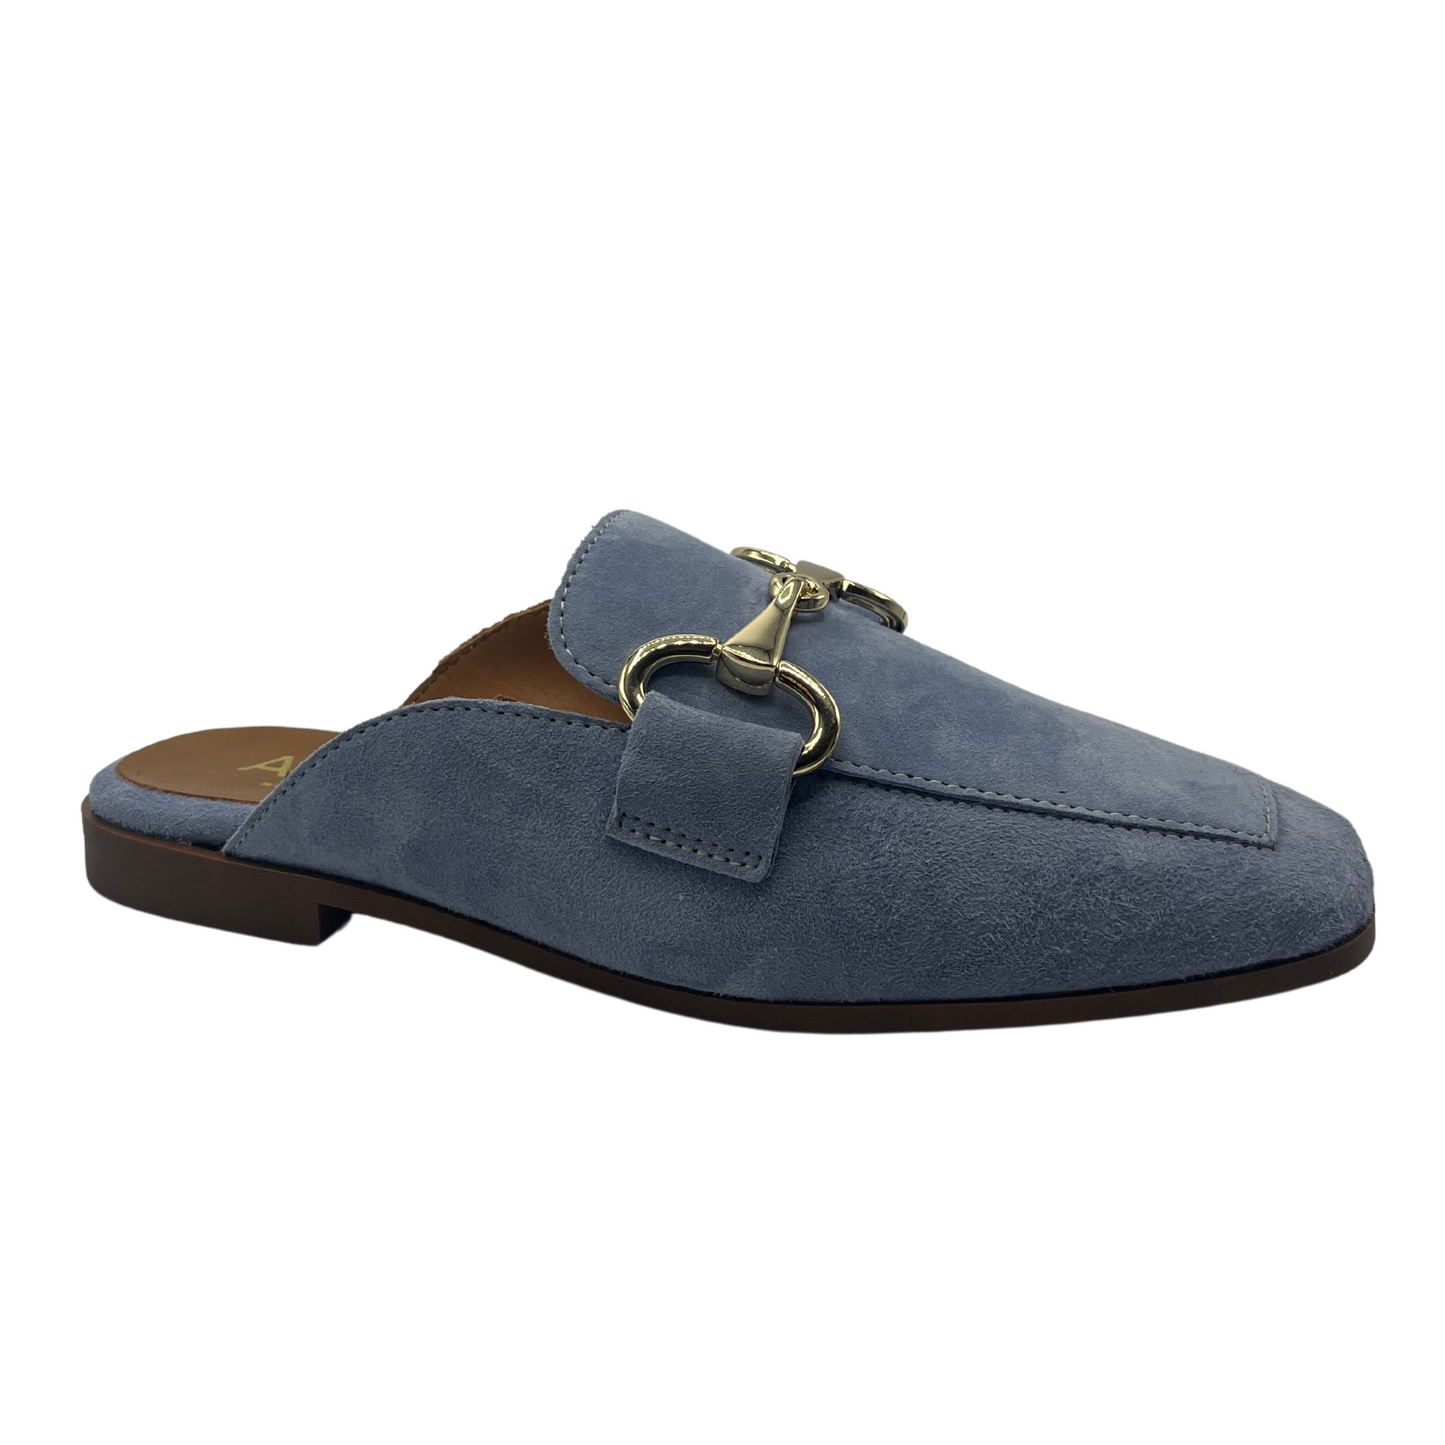 45 degree angled view of blue leather slip on loafer with low heel and gold bit detail on upper